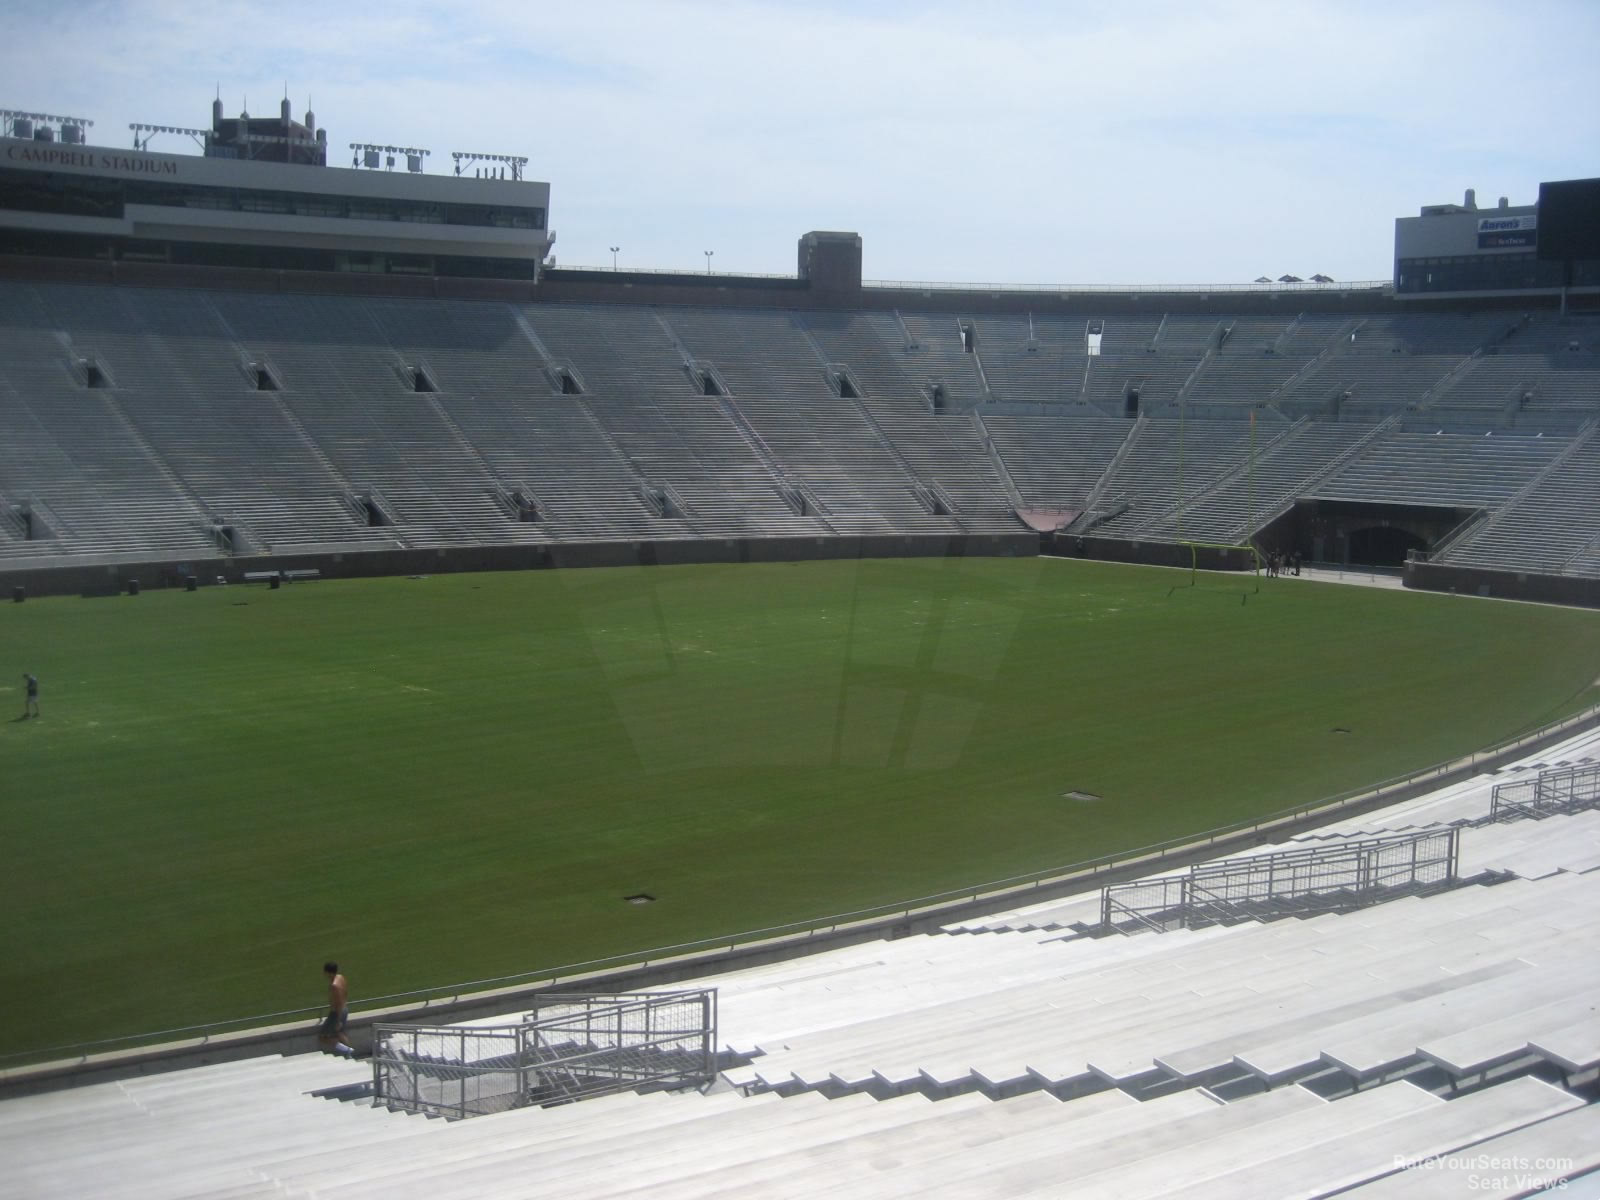 section 36, row 41 seat view  - doak campbell stadium